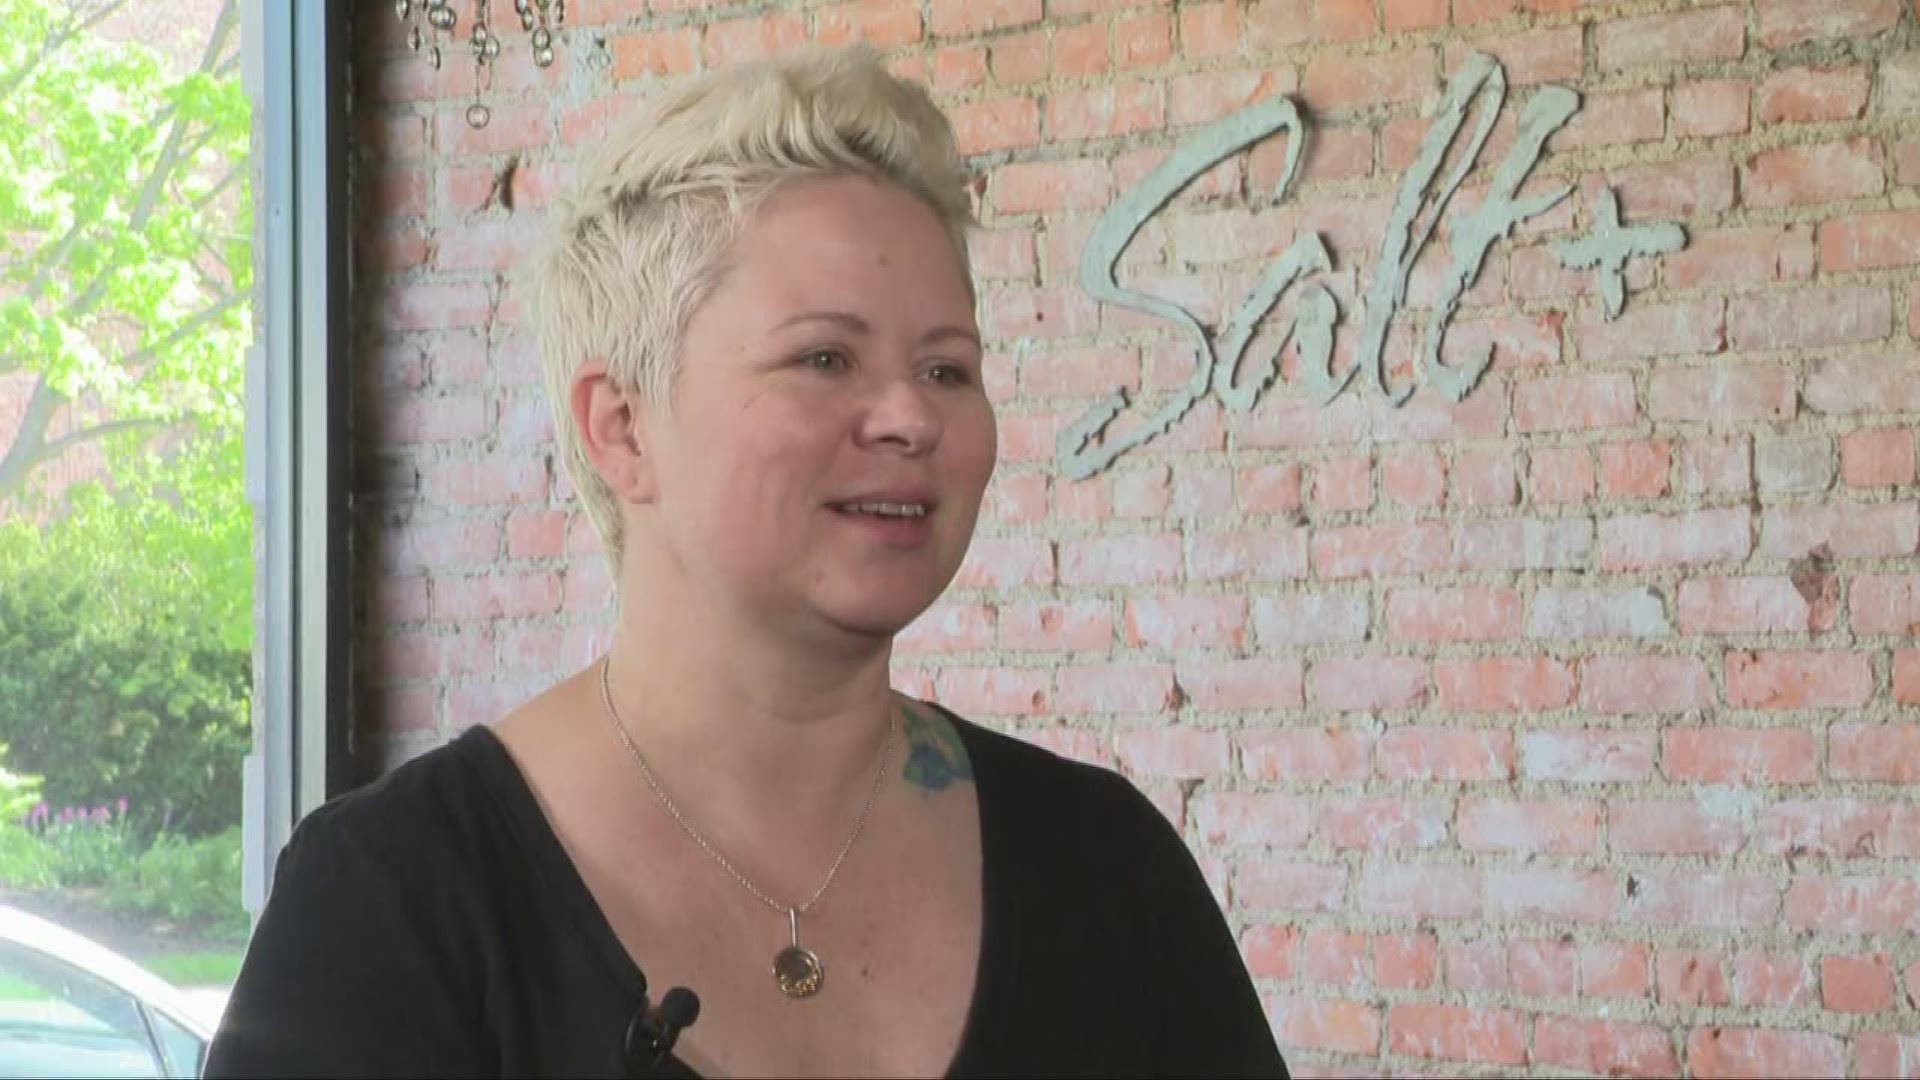 May 22, 2019: Since opening her first Salt+ restaurant just three years ago in Lakewood, chef Jill Vedaa has been racking up accolades and honors, soaring to the top of Cleveland's culinary scene. The Cleveland native and graduate of Bay High School has received two consecutive James Beard semi-finalist nominations, which are the Oscars of the food world.